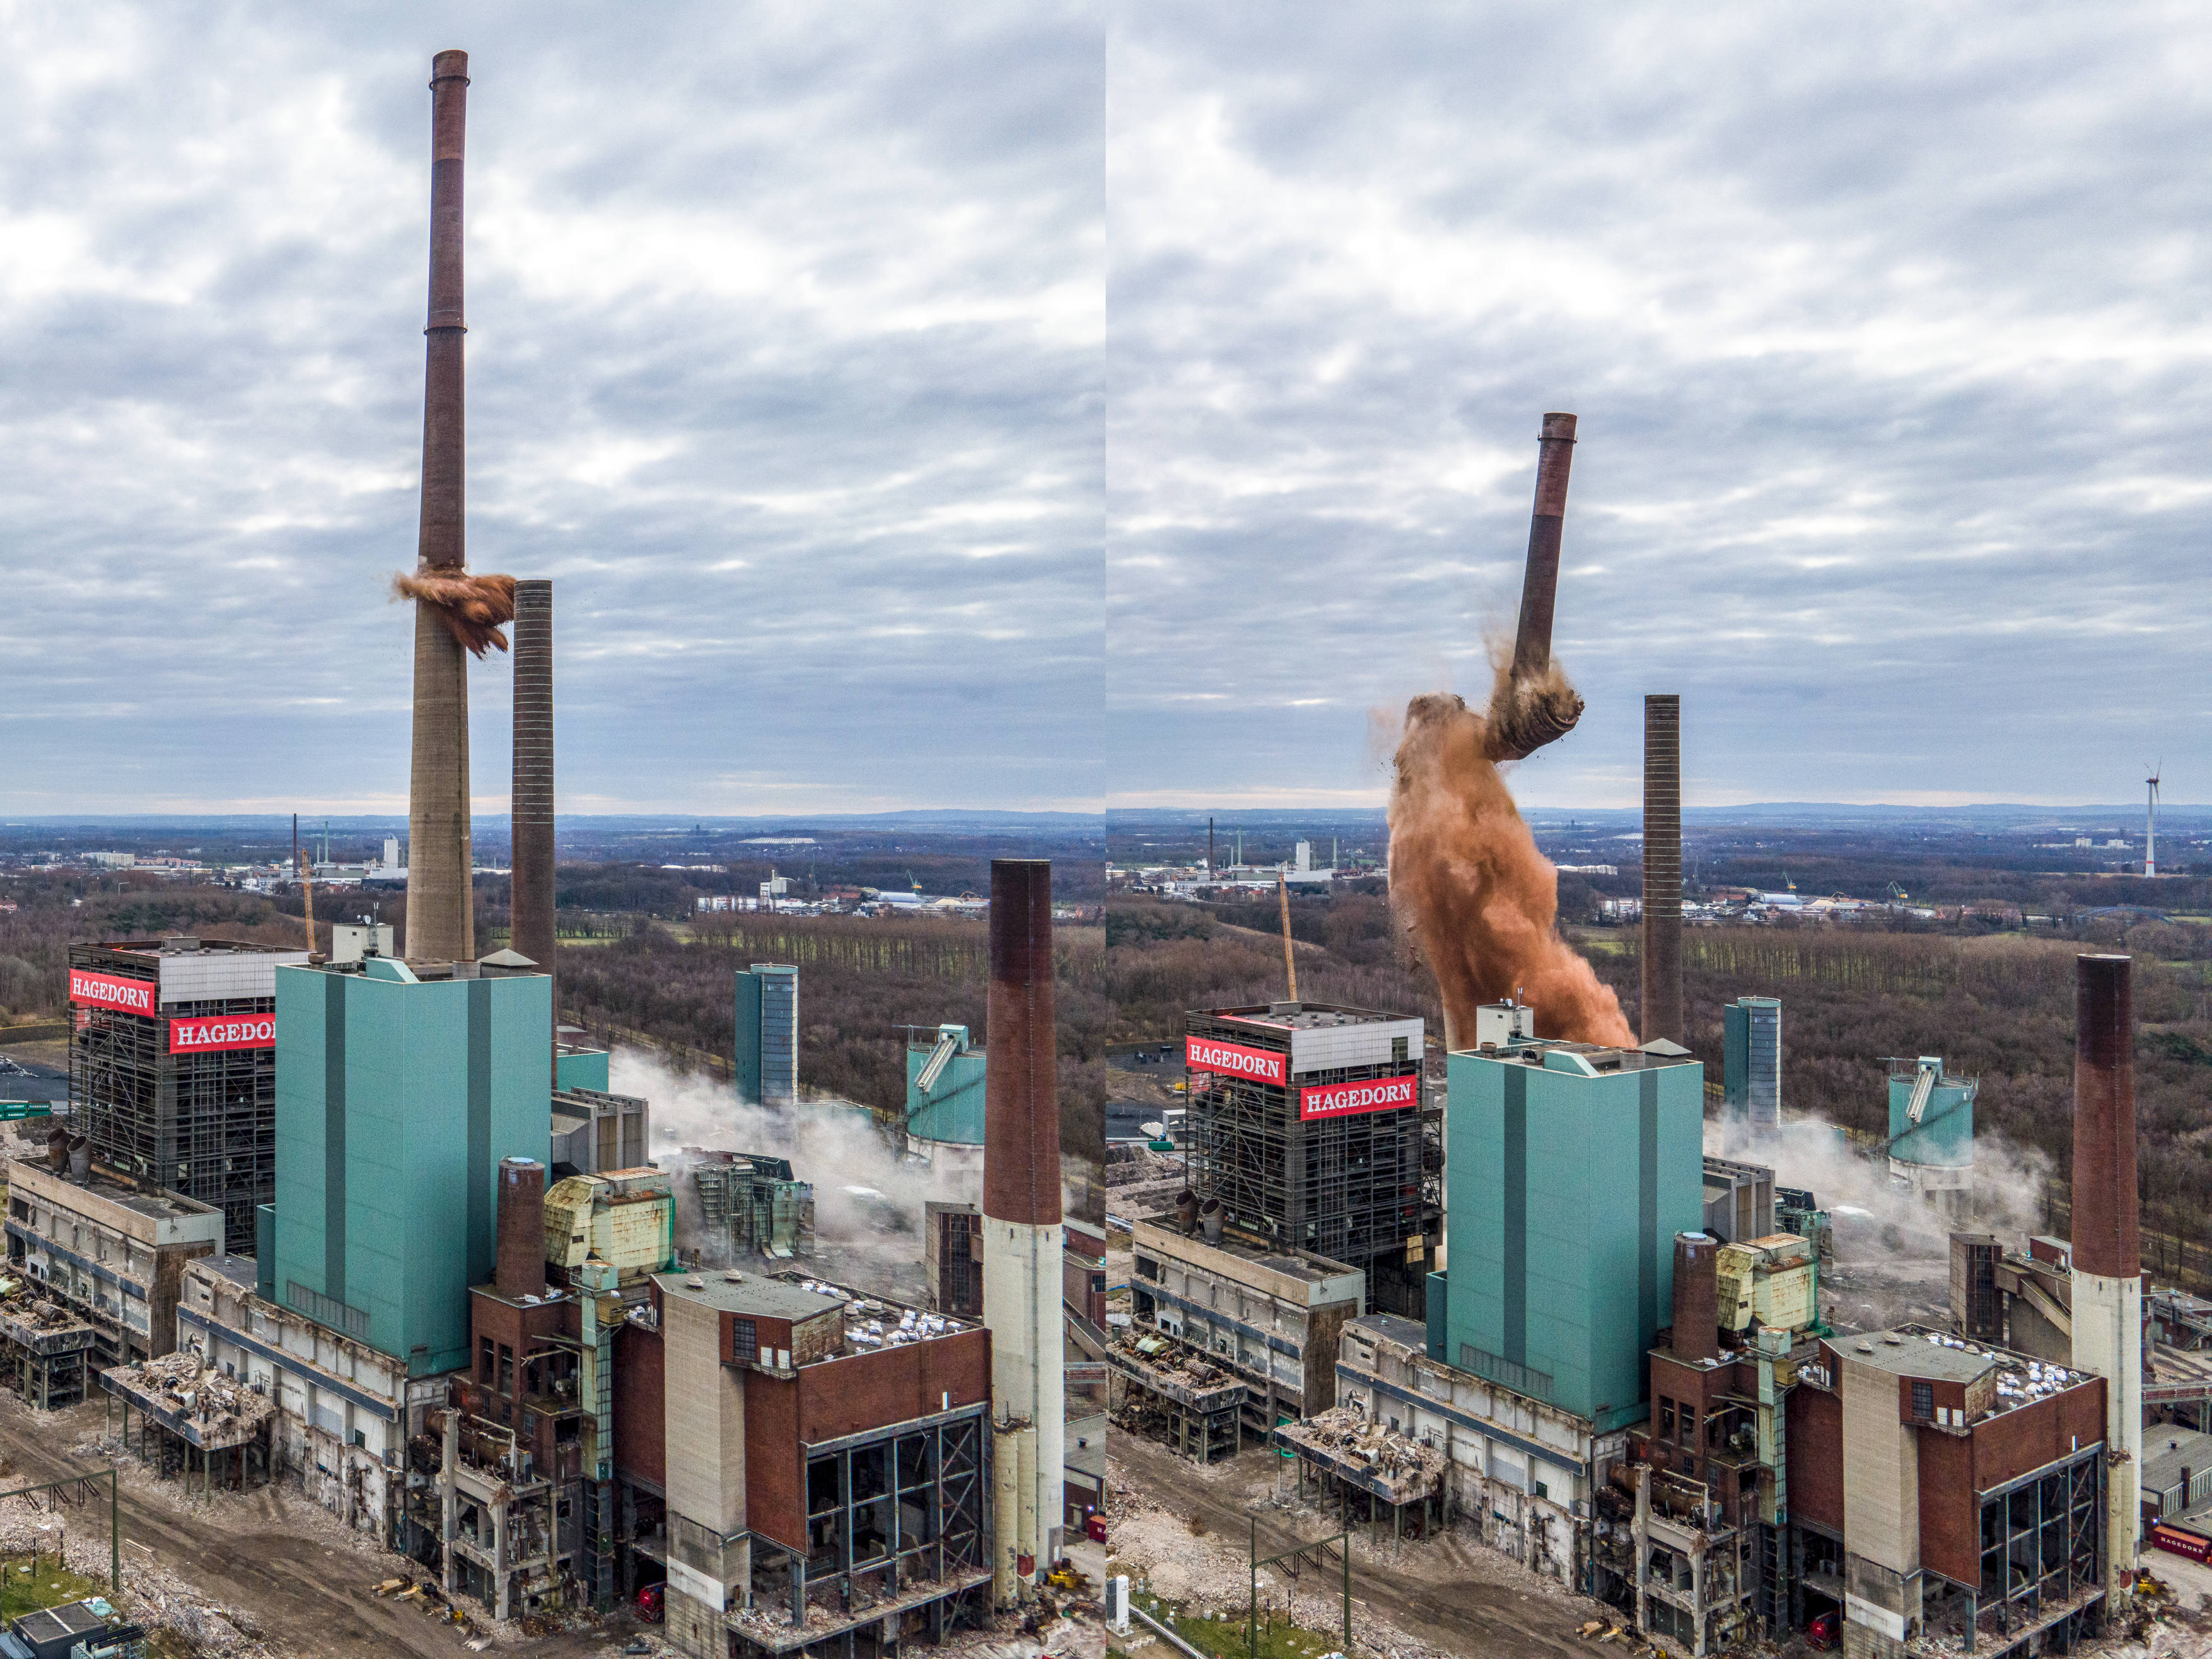 The end of a giant chimney – the flue on the former lignite power station in Lünen was 250 metres high. This imposing landmark in the Ruhr region has recently vanished. <br> Image source: Hagedorn Management GmbH